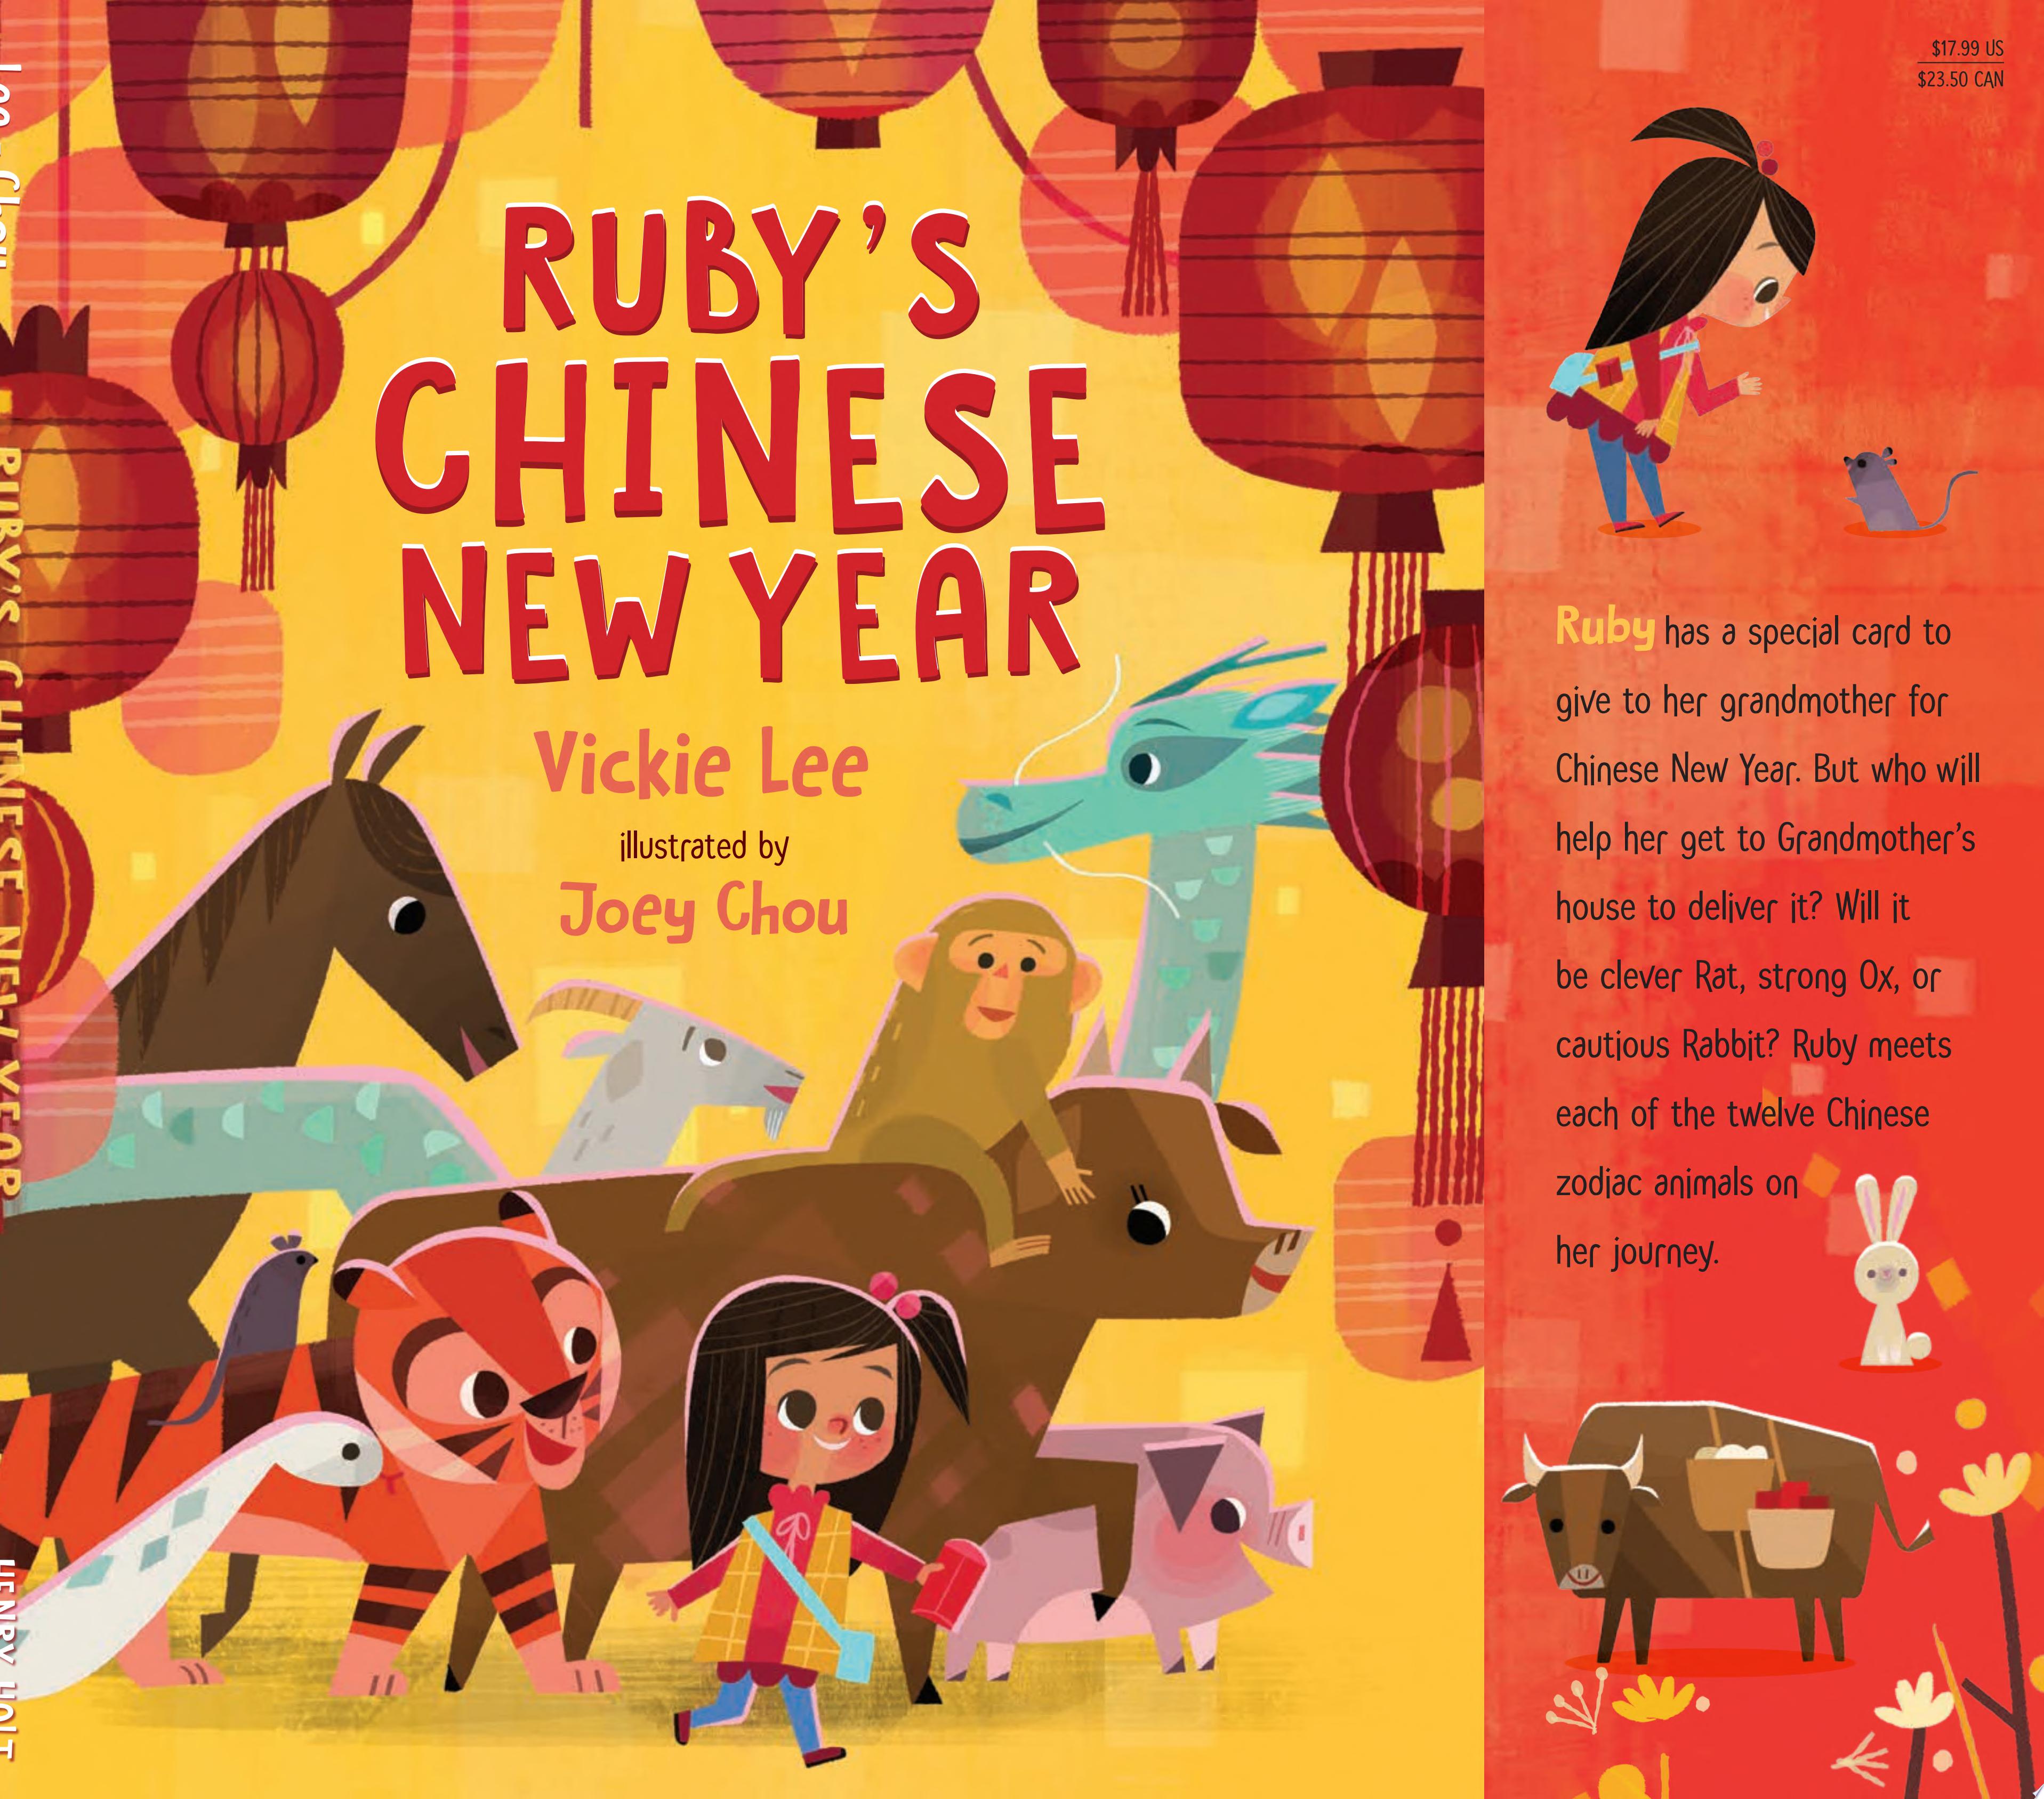 Image for "Ruby's Chinese New Year"